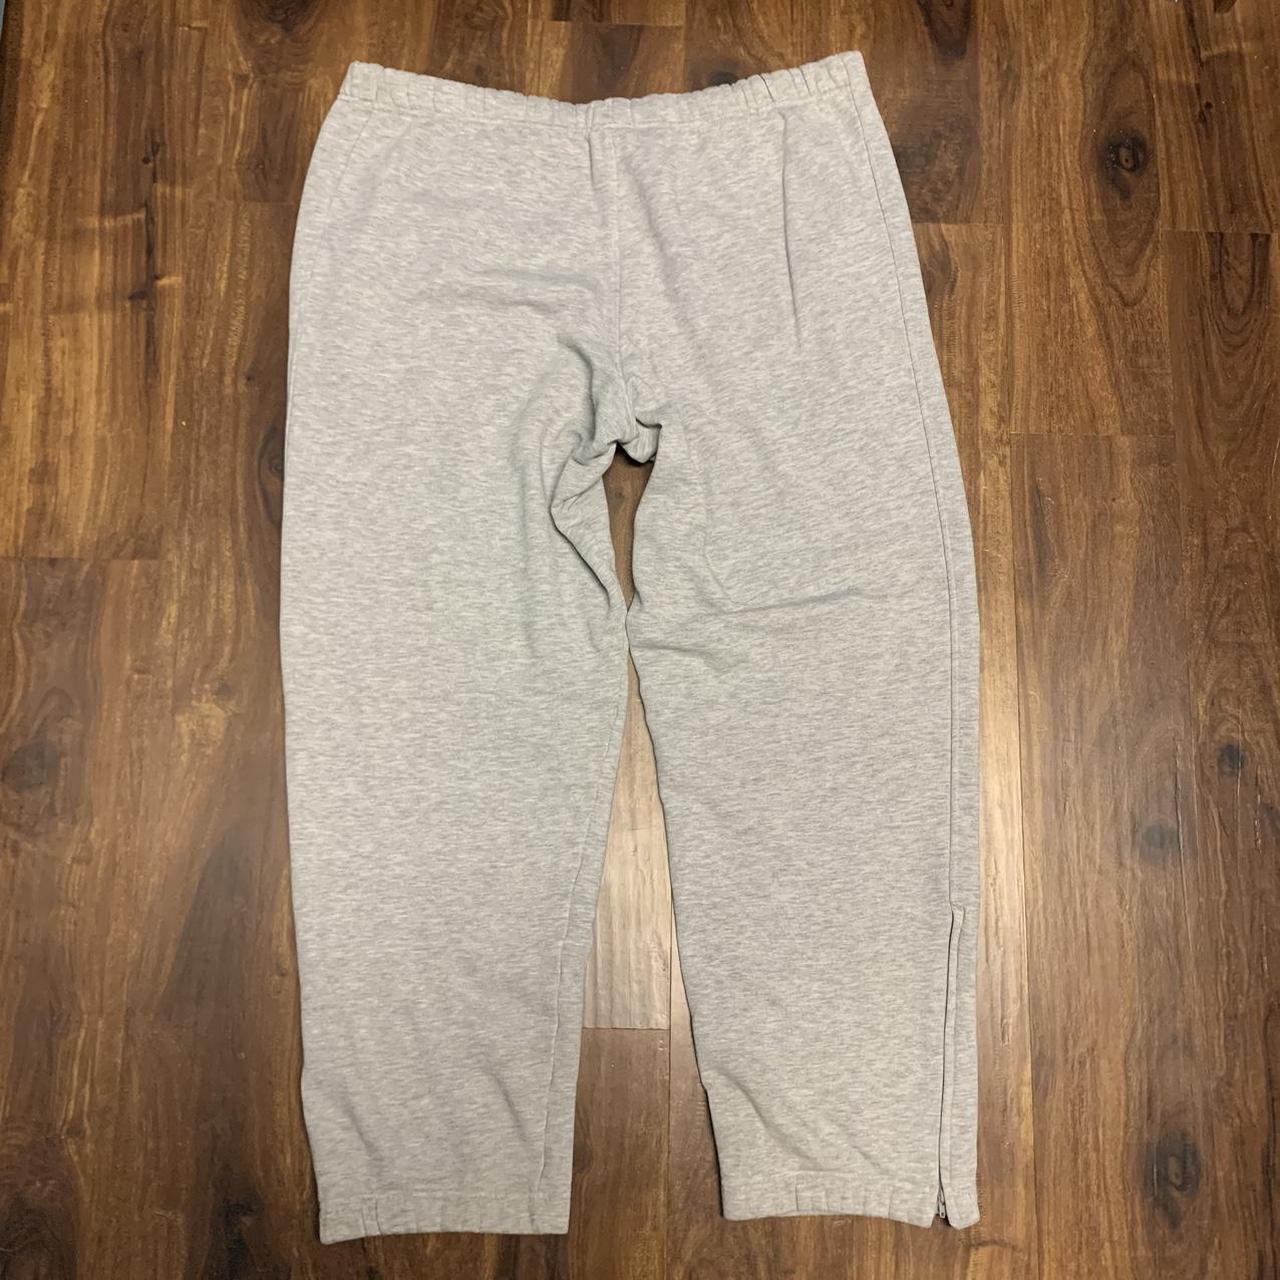 Nike Men's Grey and Black Joggers-tracksuits (3)